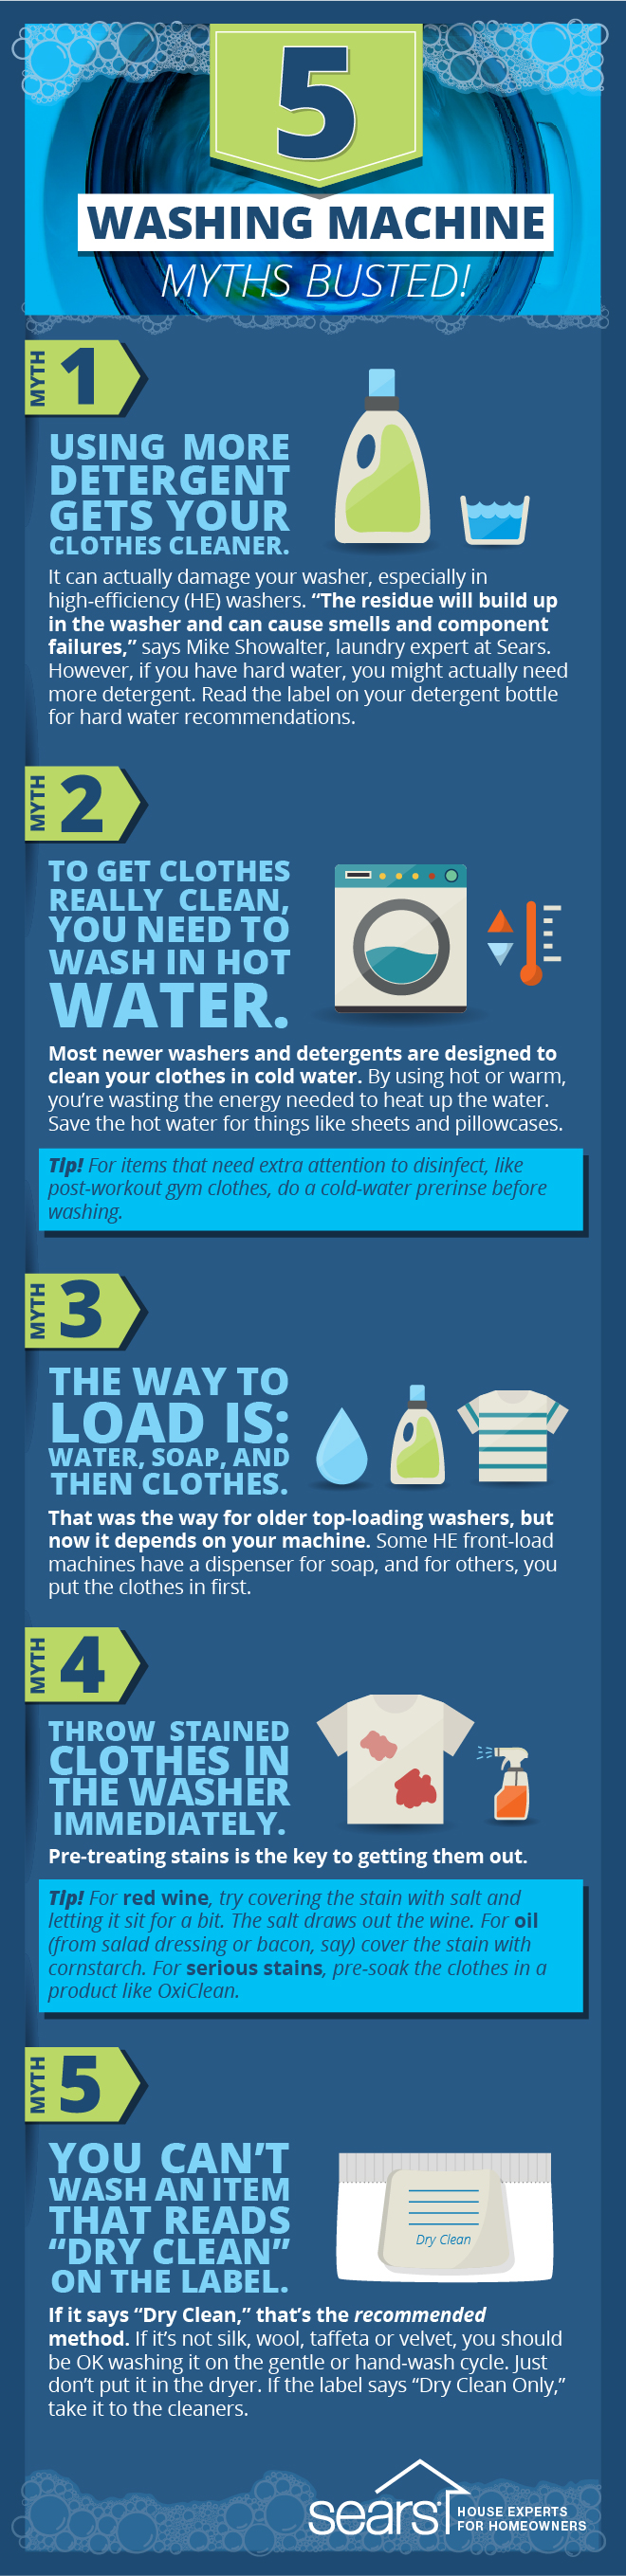 when to use hot water for laundry